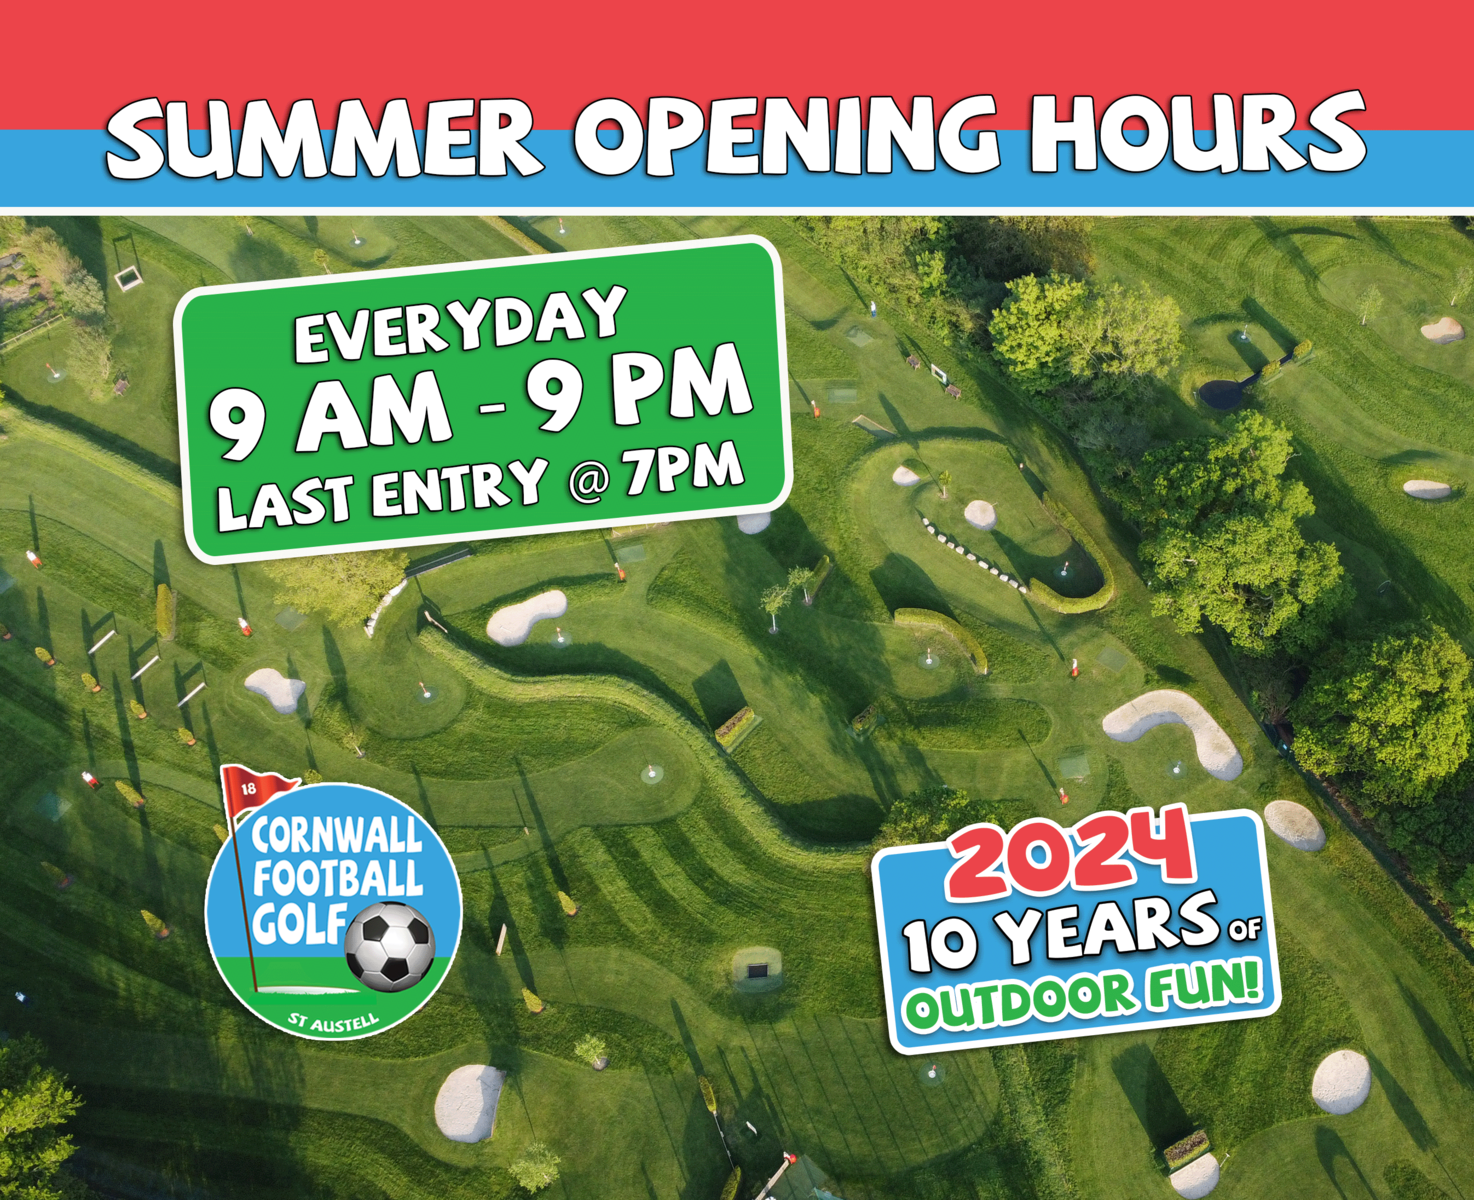 FootballGolf Summer Opening Hours - Now open from 9am everyday